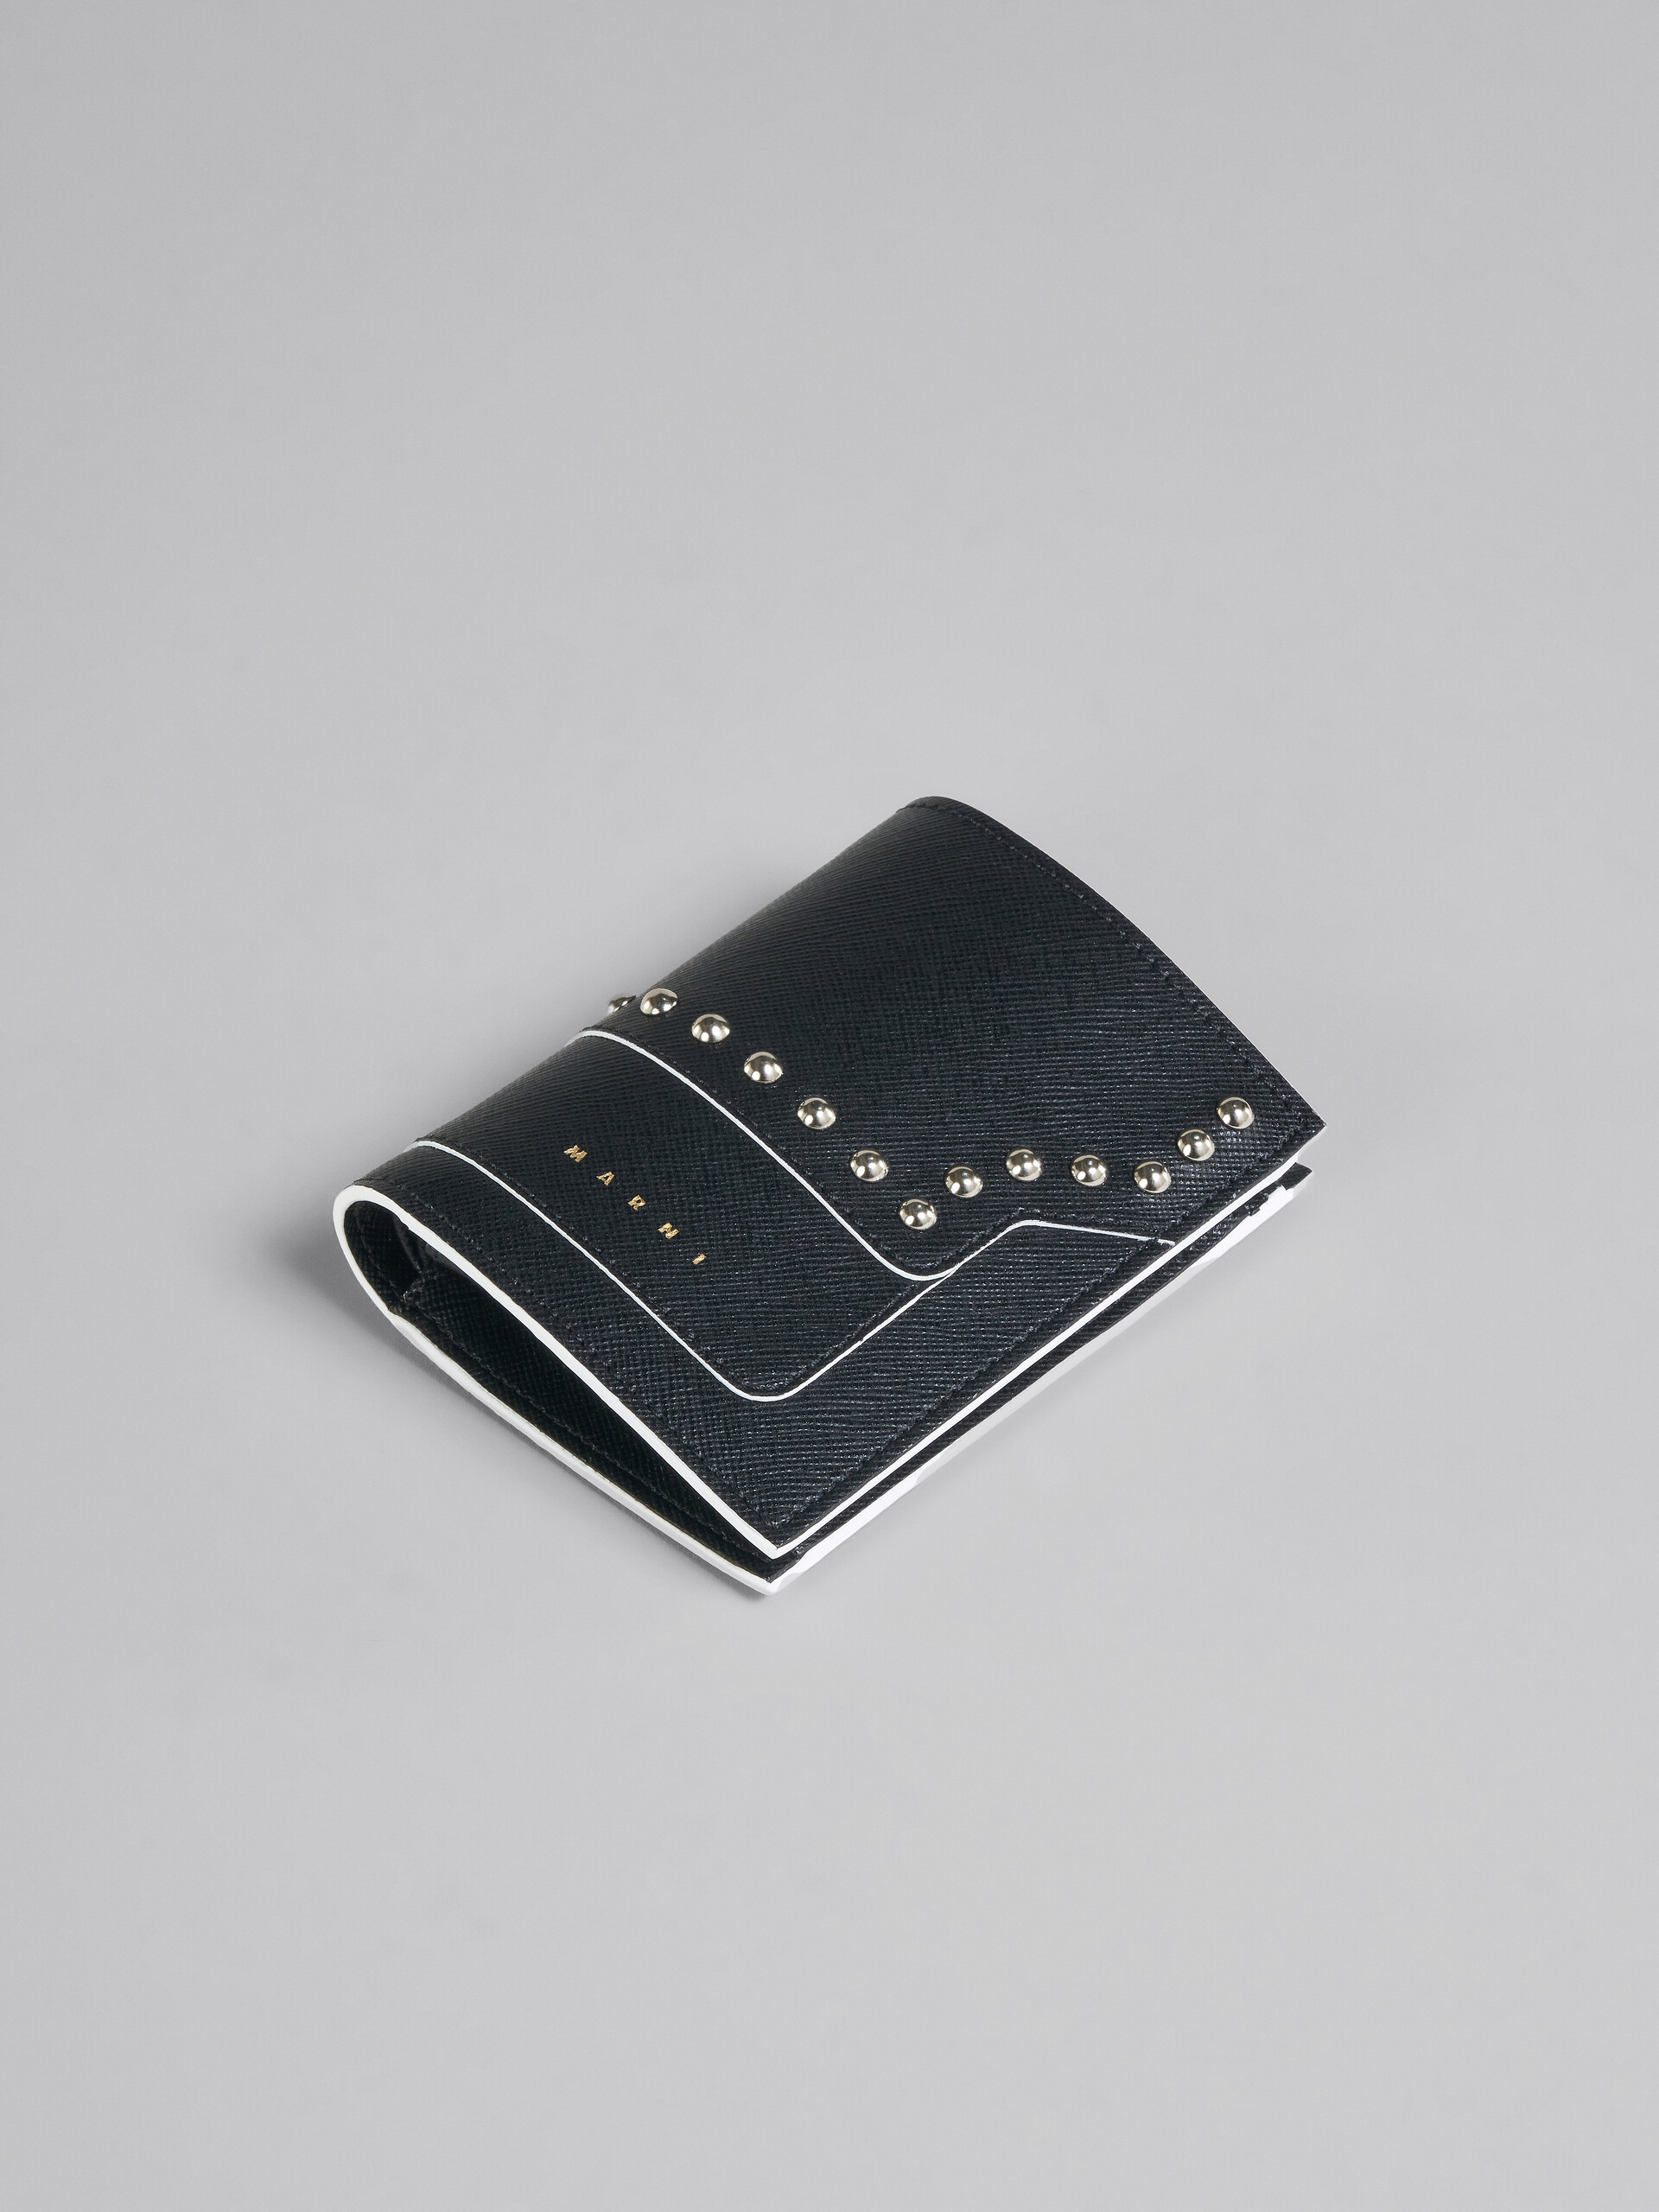 Black saffiano leather bi-fold wallet with studs - Wallets - Image 5